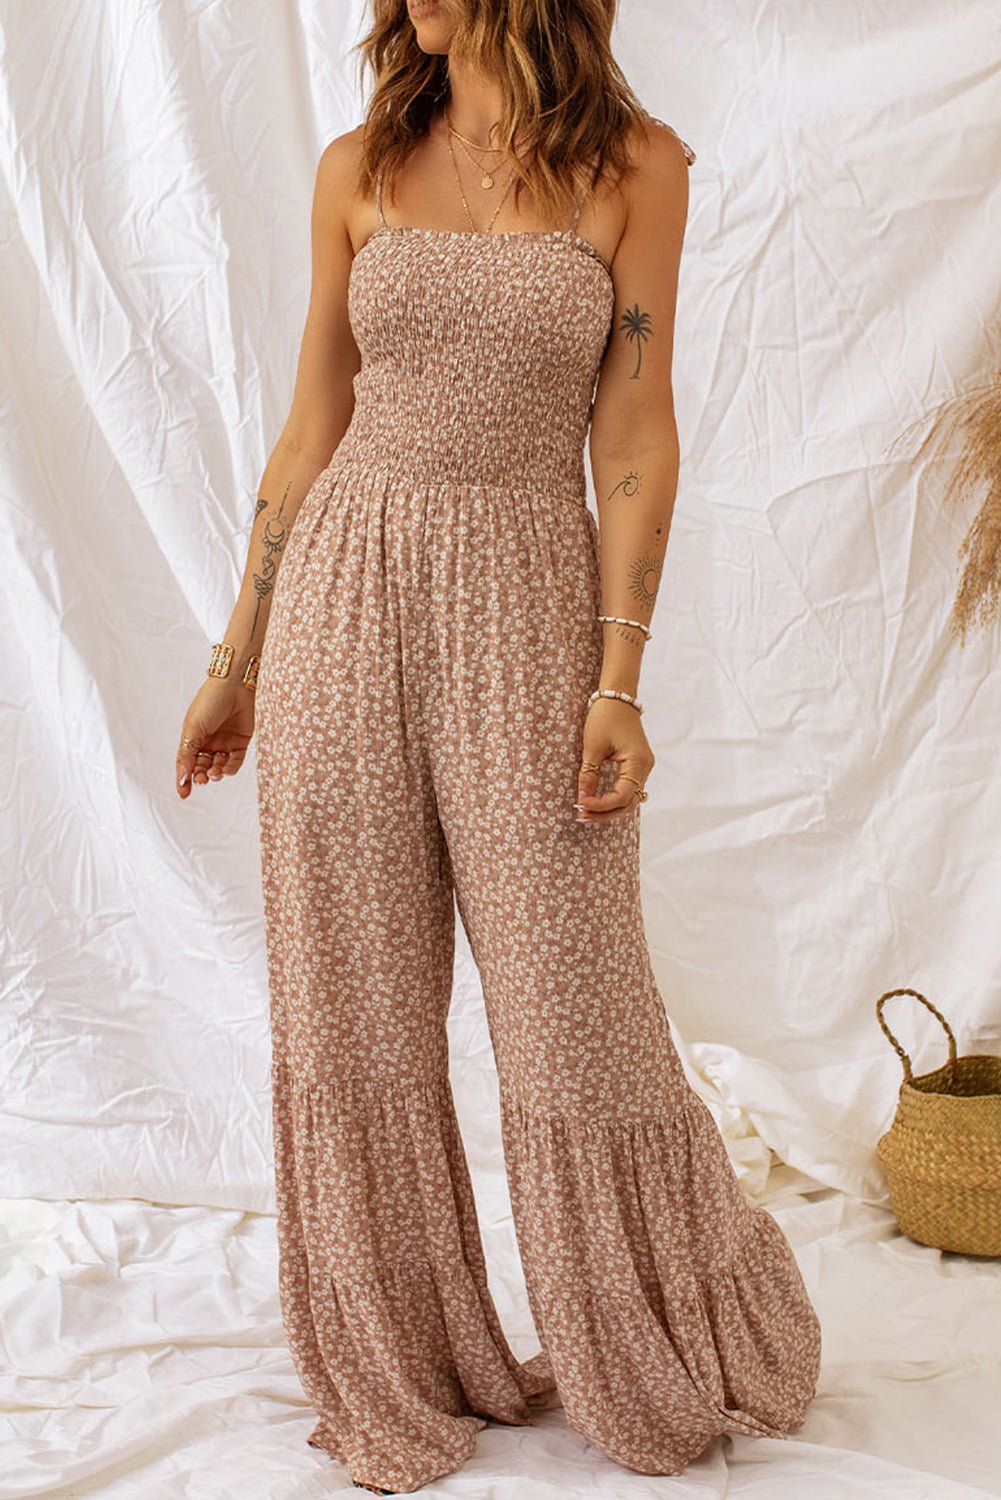 Floral Spaghetti Strap Smocked Wide Leg Jumpsuit - Fashion Girl Online Store